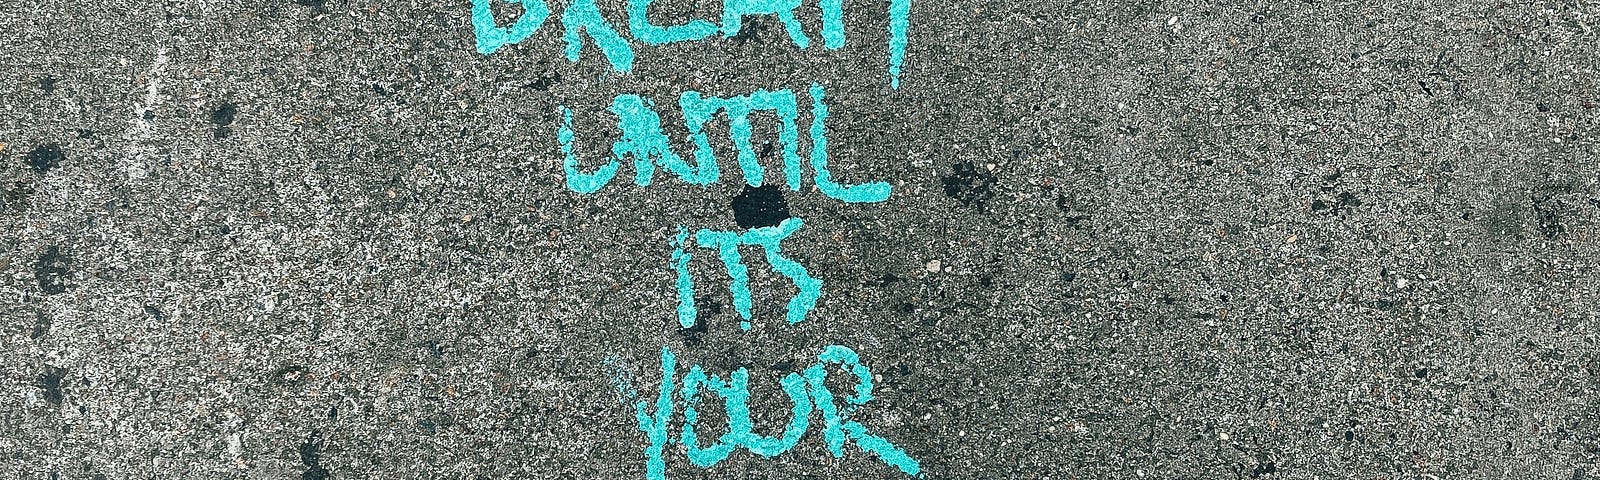 Dream until it is your reality written in chalk on a pavement